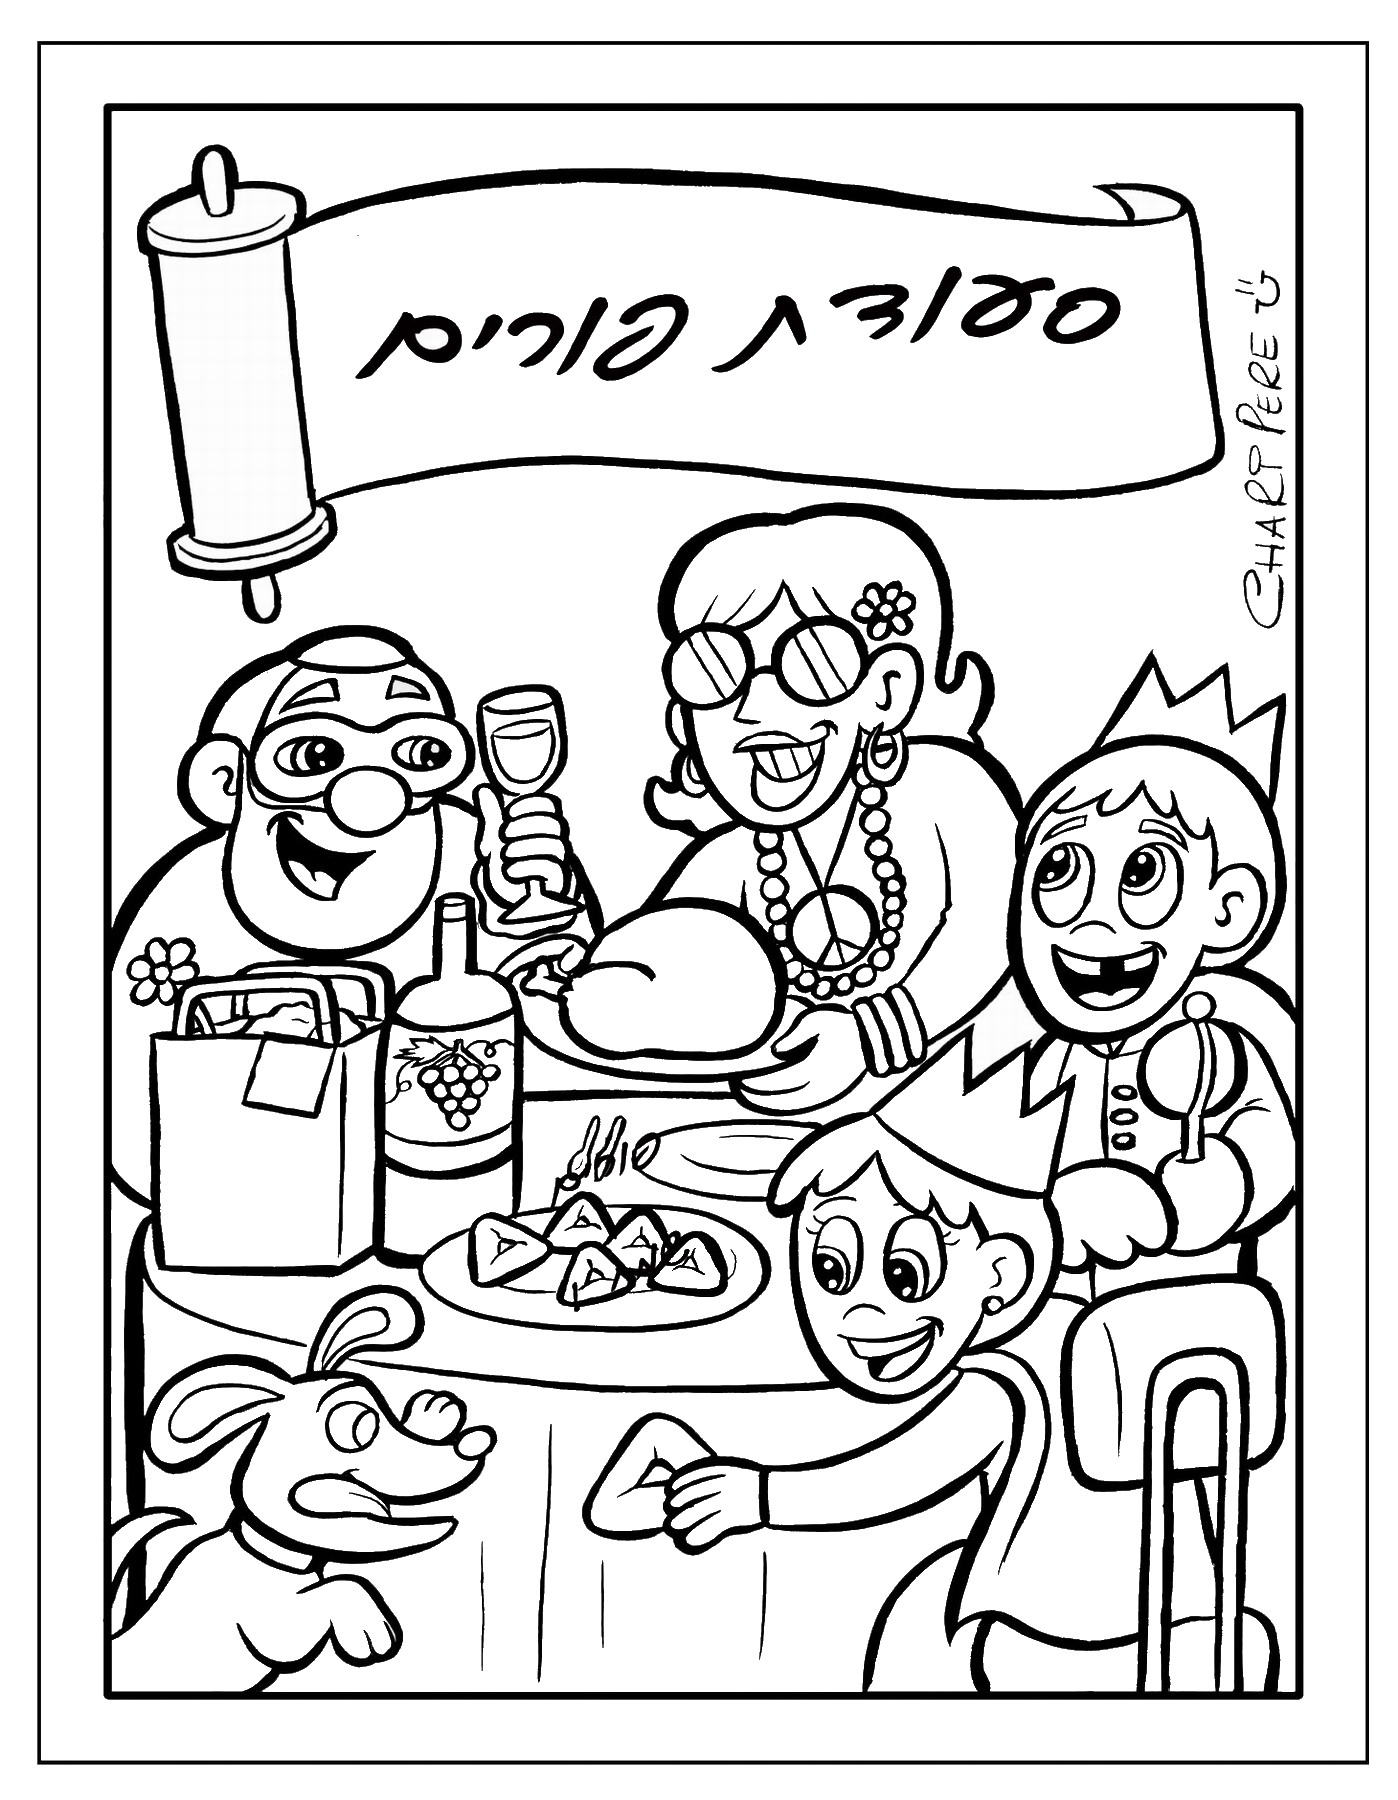 Purim Coloring Page Purim Coloring Pages